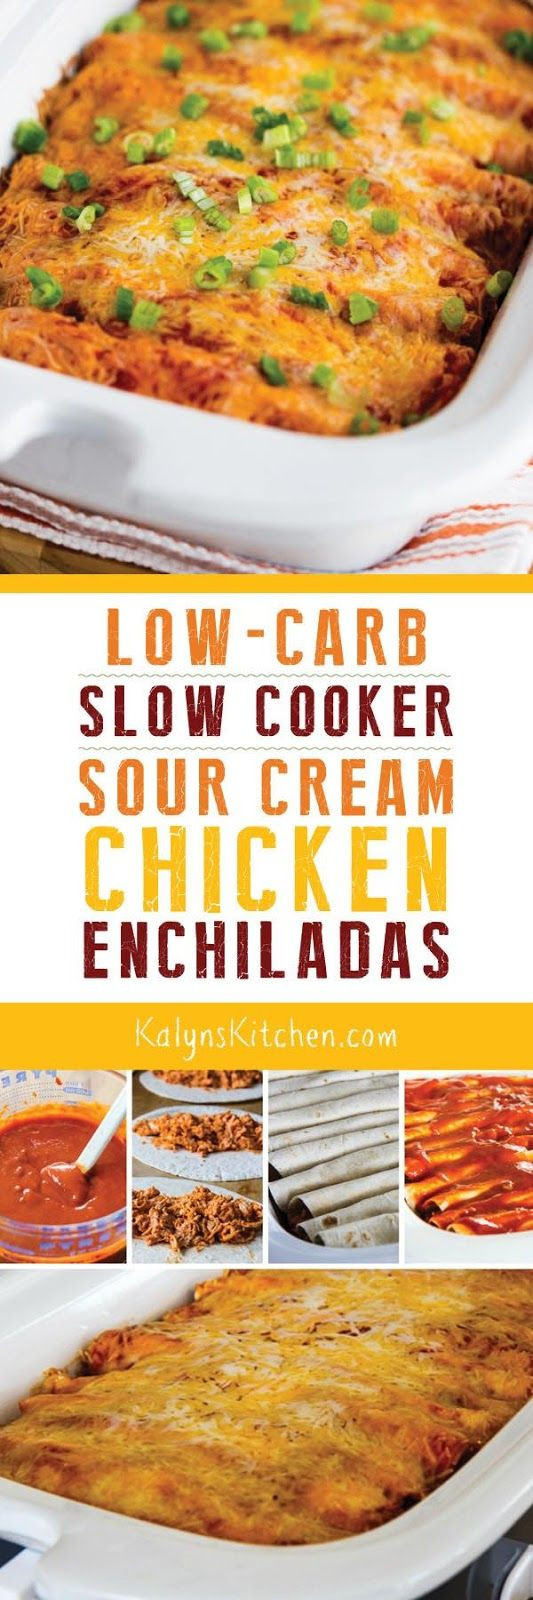 Healthy Low Carb Slow Cooker Recipes
 Low Carb Slow Cooker Sour Cream Chicken Enchiladas